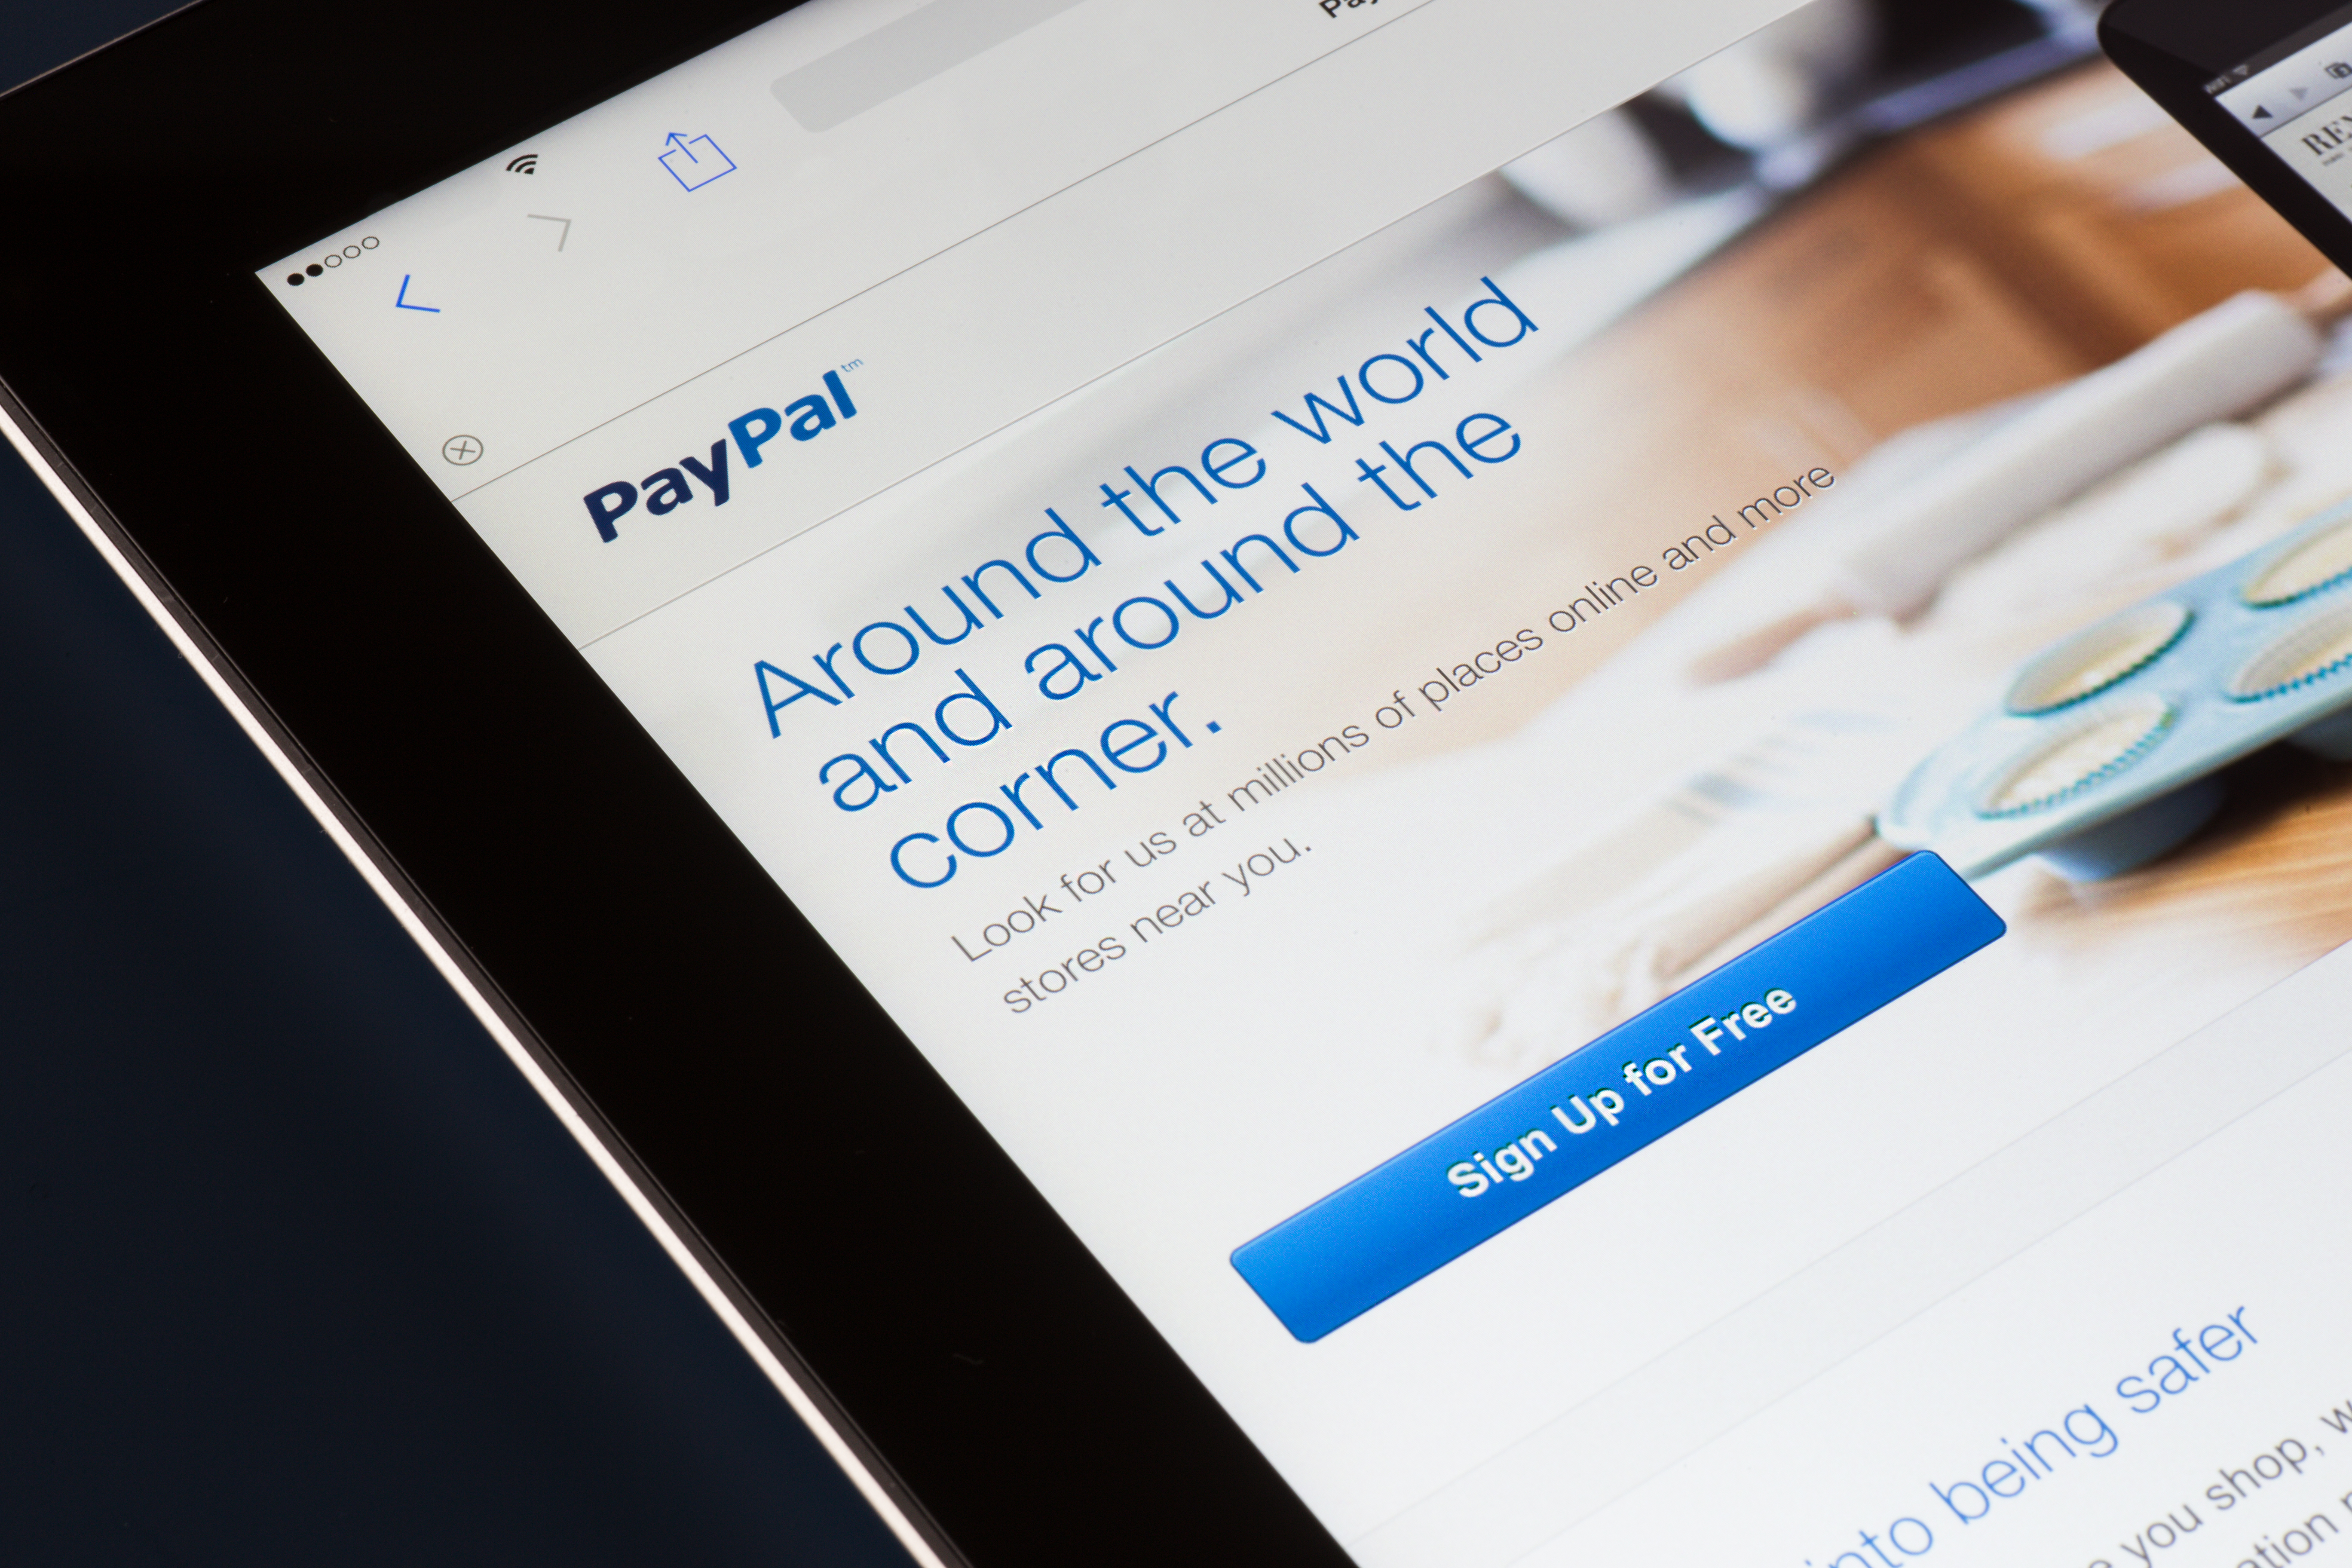 NEW YORK CITY - FEB. 3, 2014:  Paypal website displayed on tablet screen against dark background.  Established in 1999, PayPal a